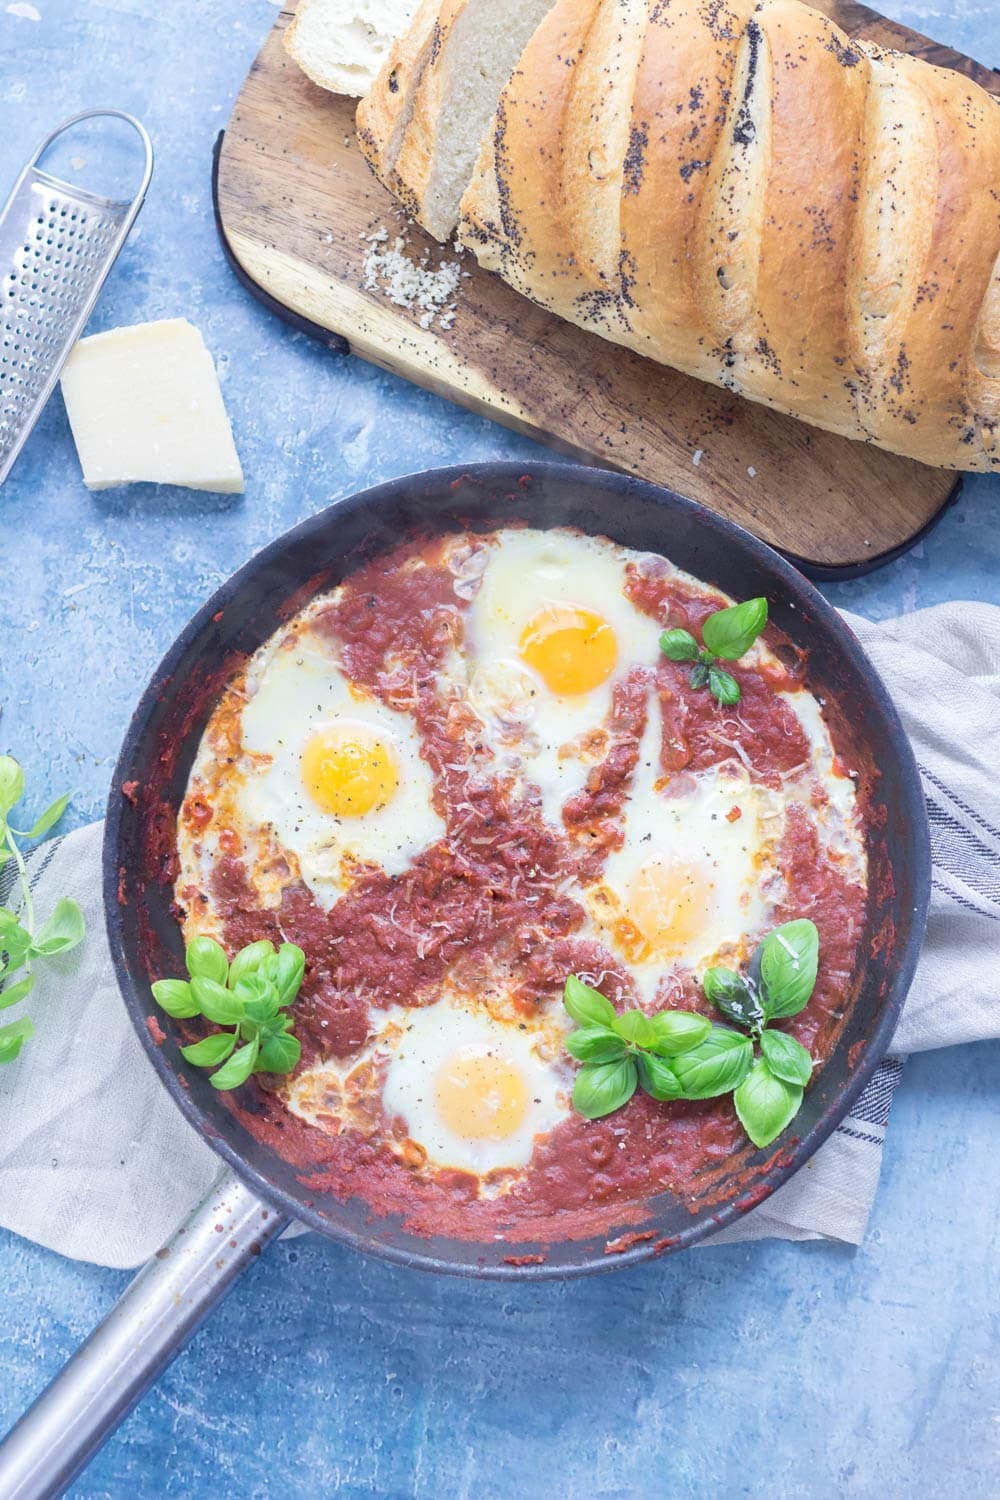 Serve up a hearty breakfast with this Italian shakshuka. Made with a delicious oregano tomato sauce and finished with a sprinkling of parmesan. #shakshuka #recipe #breakfast #brunch #italianfood